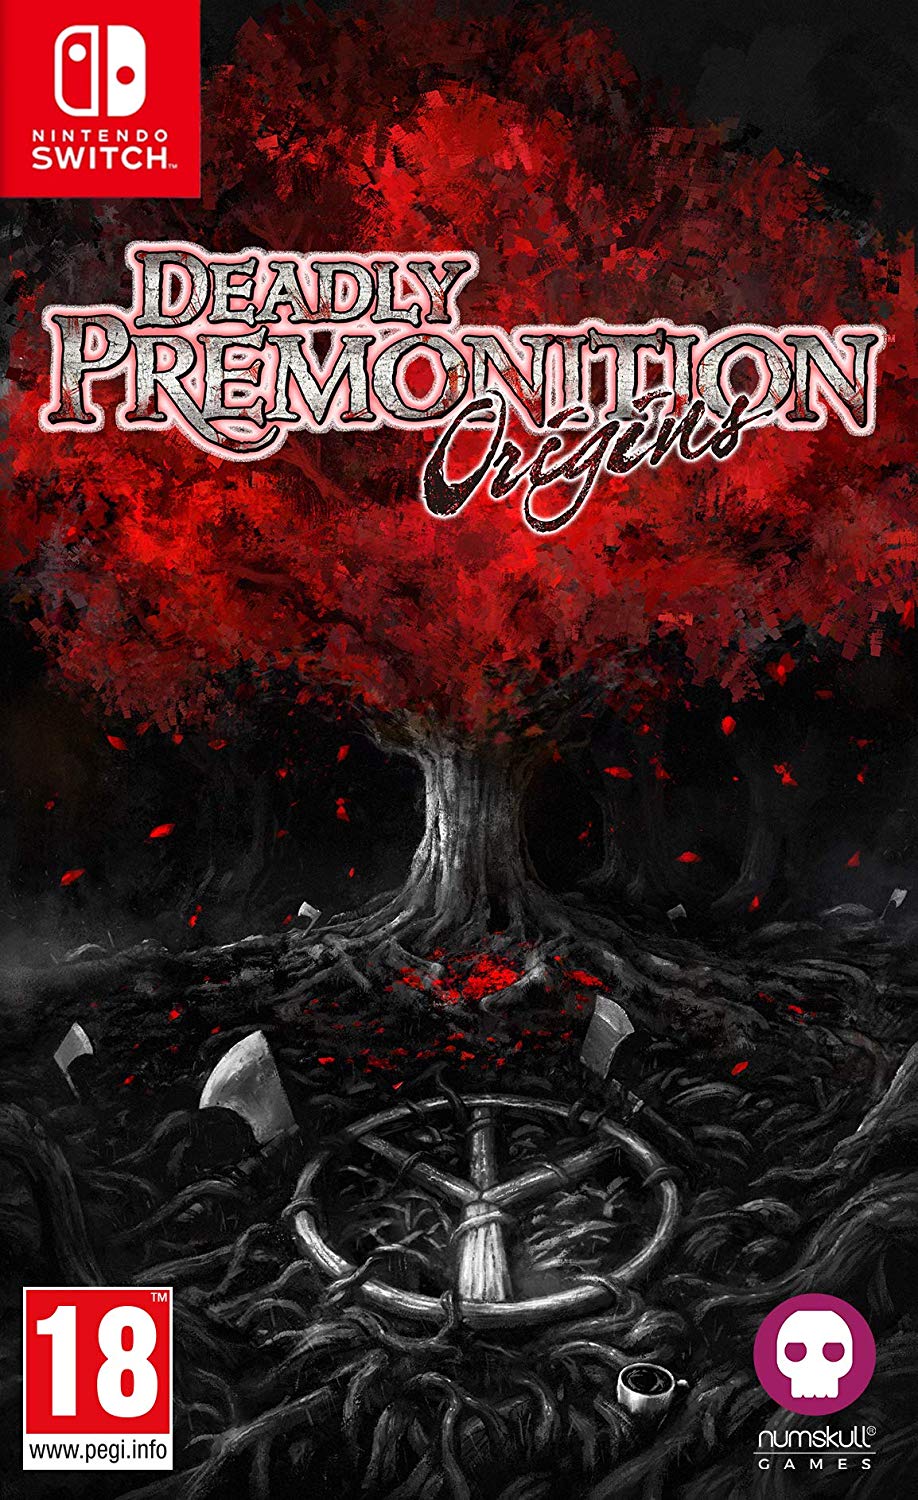 Deadly Premonitions: Origins (Nintendo Switch) - Offer Games